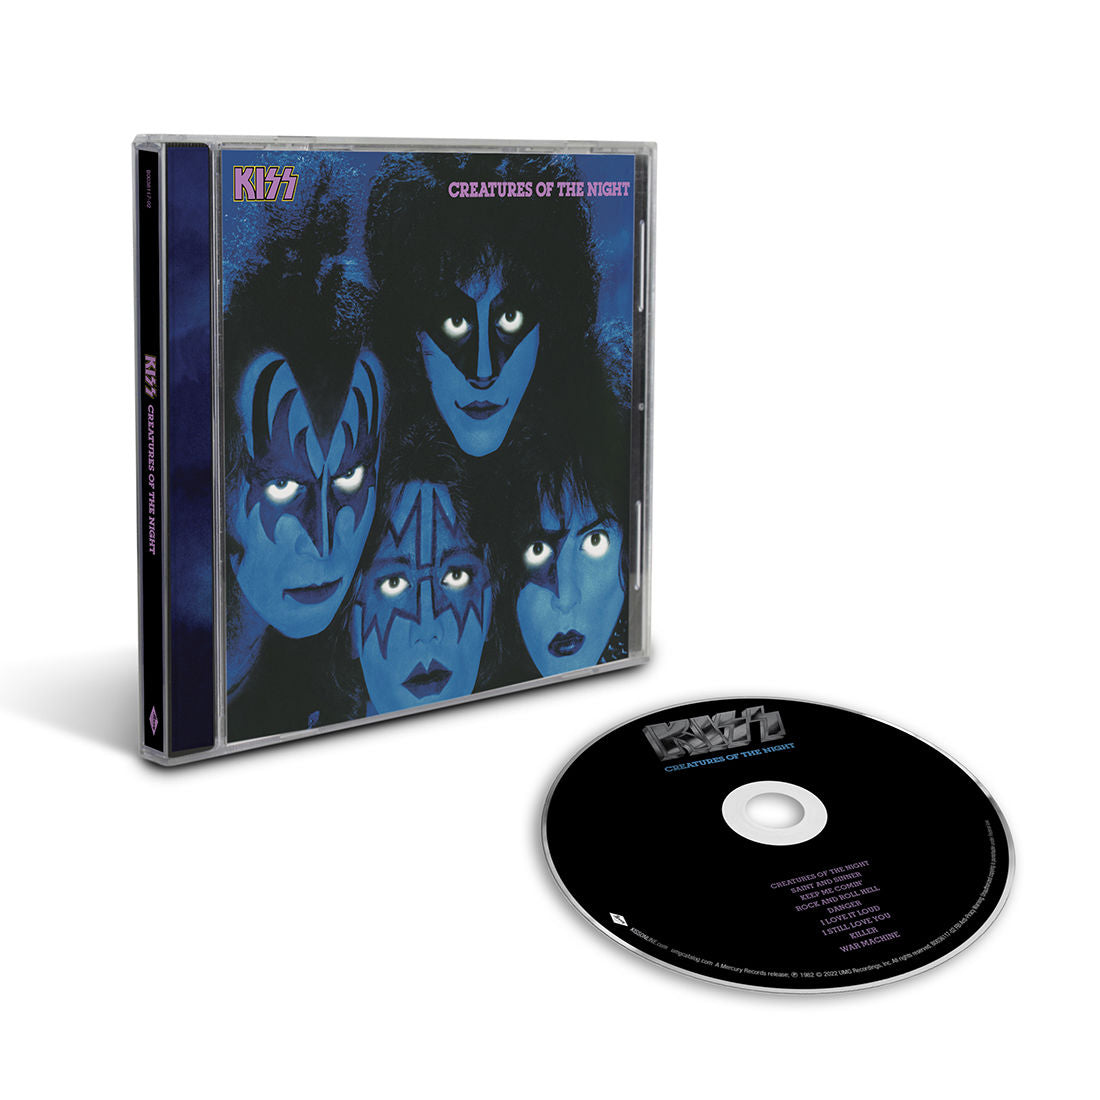 Kiss - Creatures Of The Night - 40th Anniversary Edition: CD